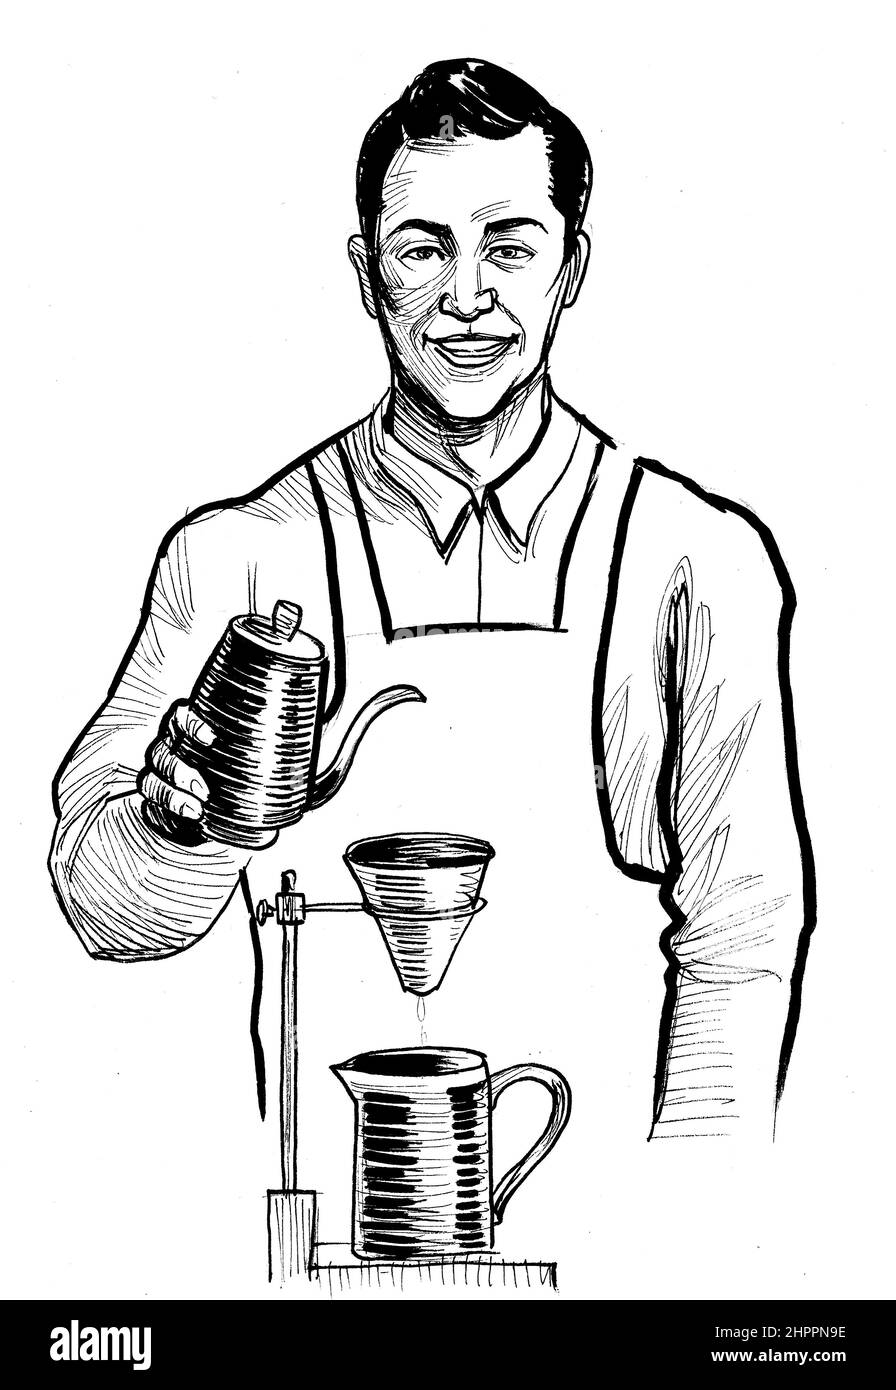 Barista making coffee. Ink black and white drawing Stock Photo